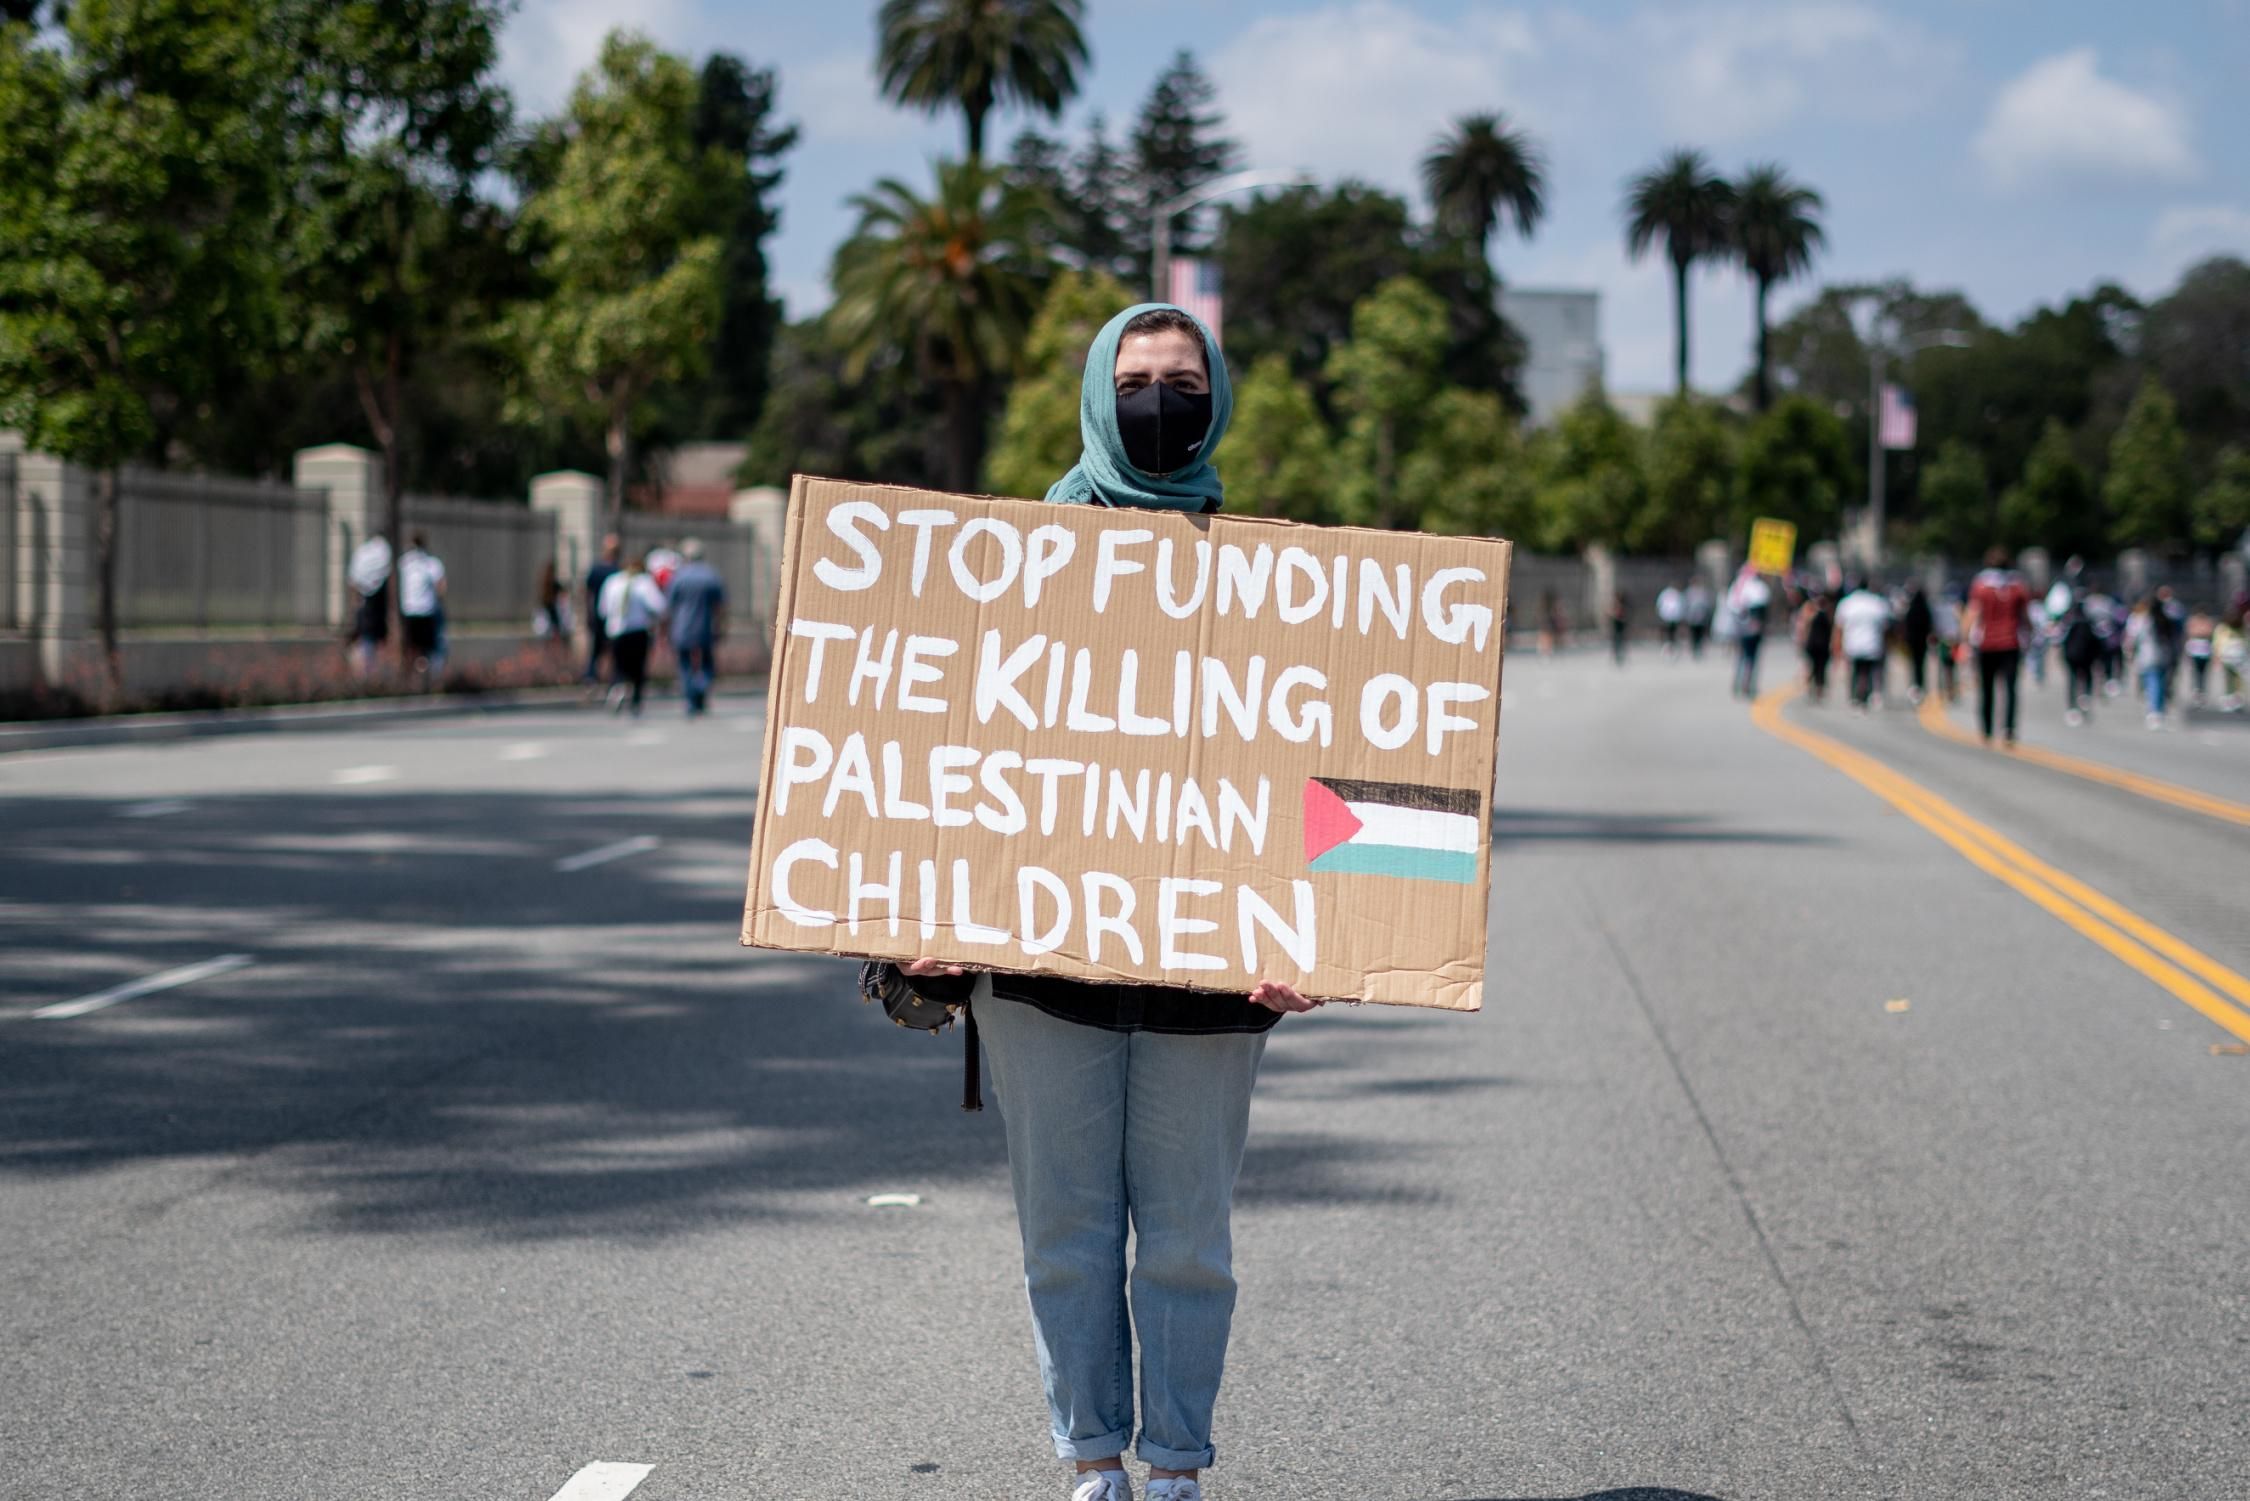 People attend a protest against Israel's assault on Gaza in Los Angeles, California on Saturday, May 15, 2021.